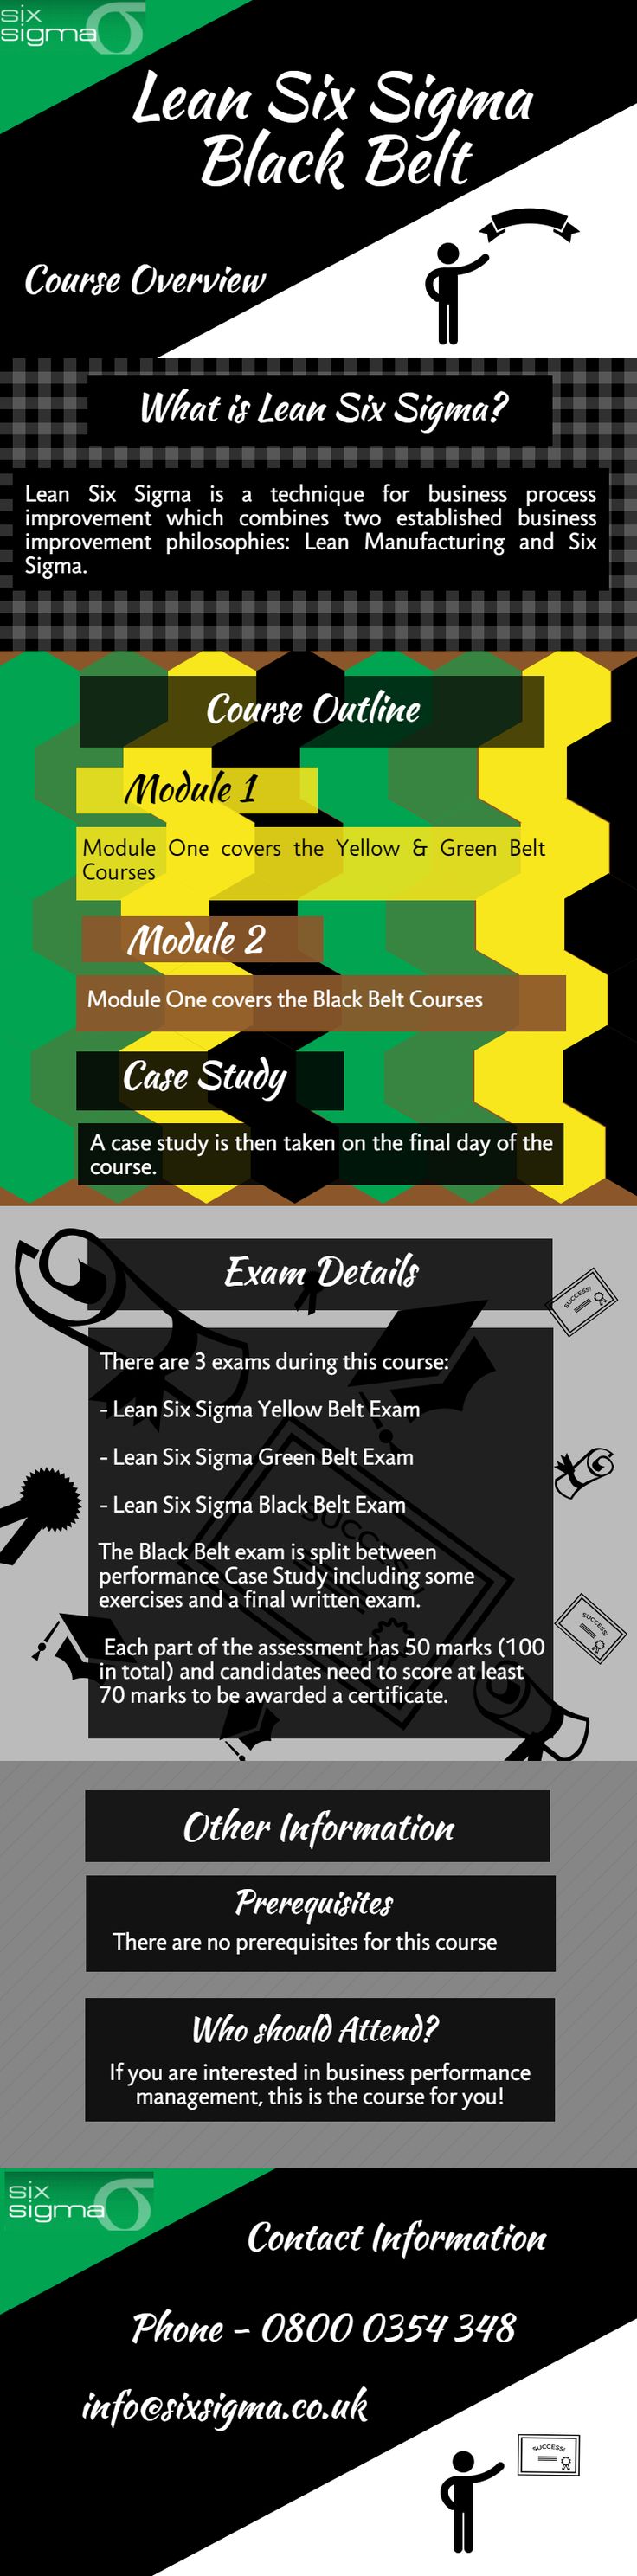 An infographic about the six sigma black belt course | Black belt